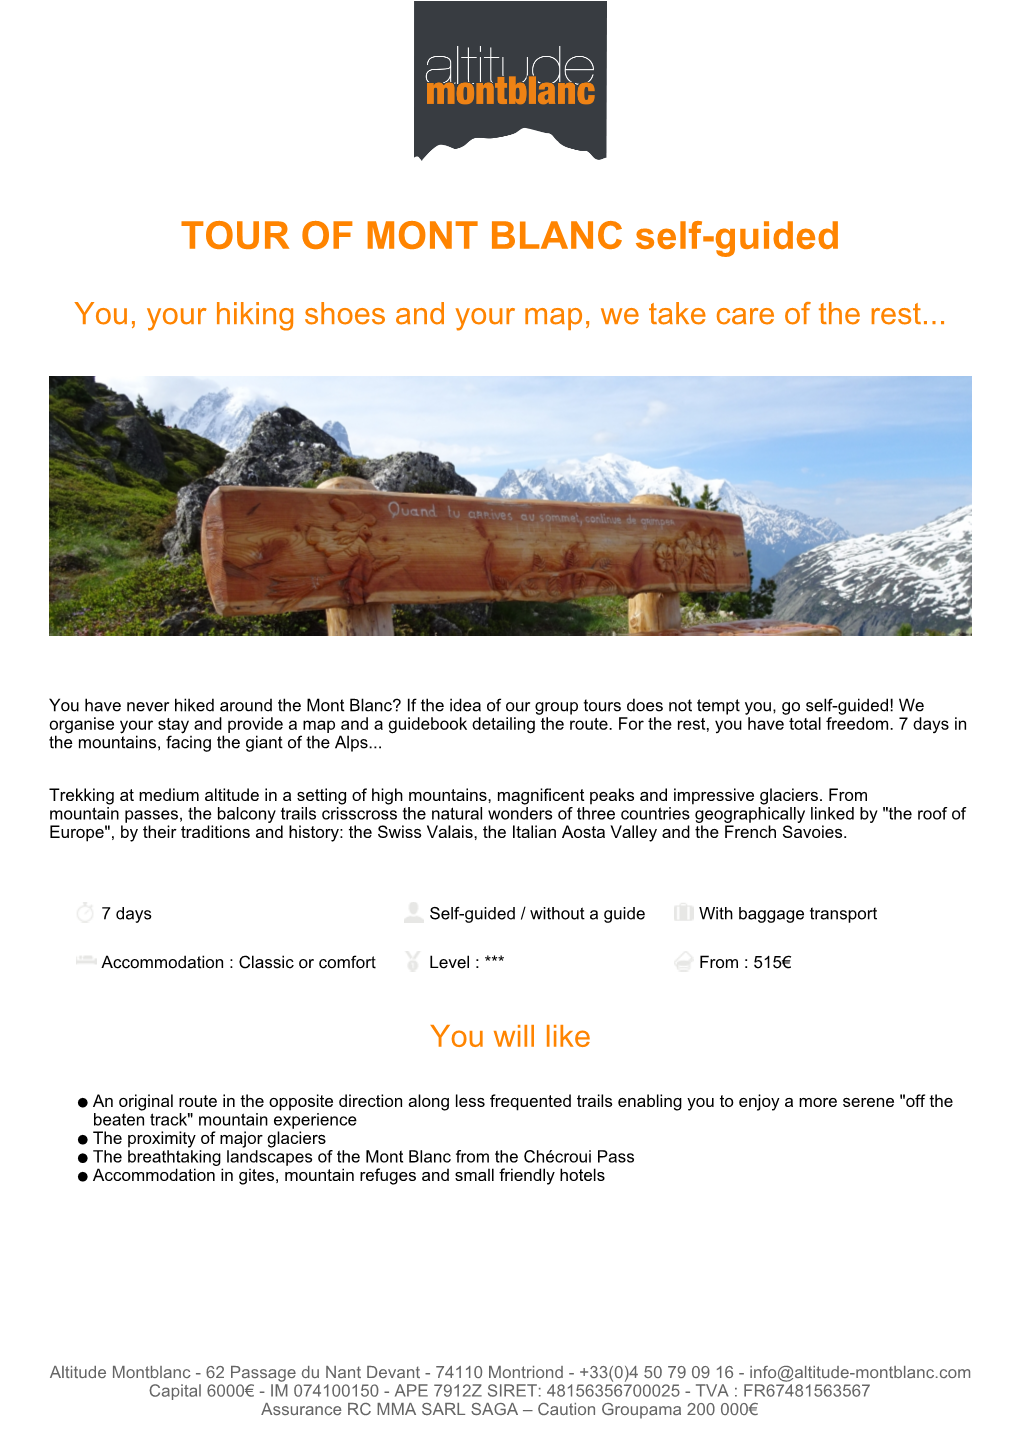 TOUR of MONT BLANC Self-Guided